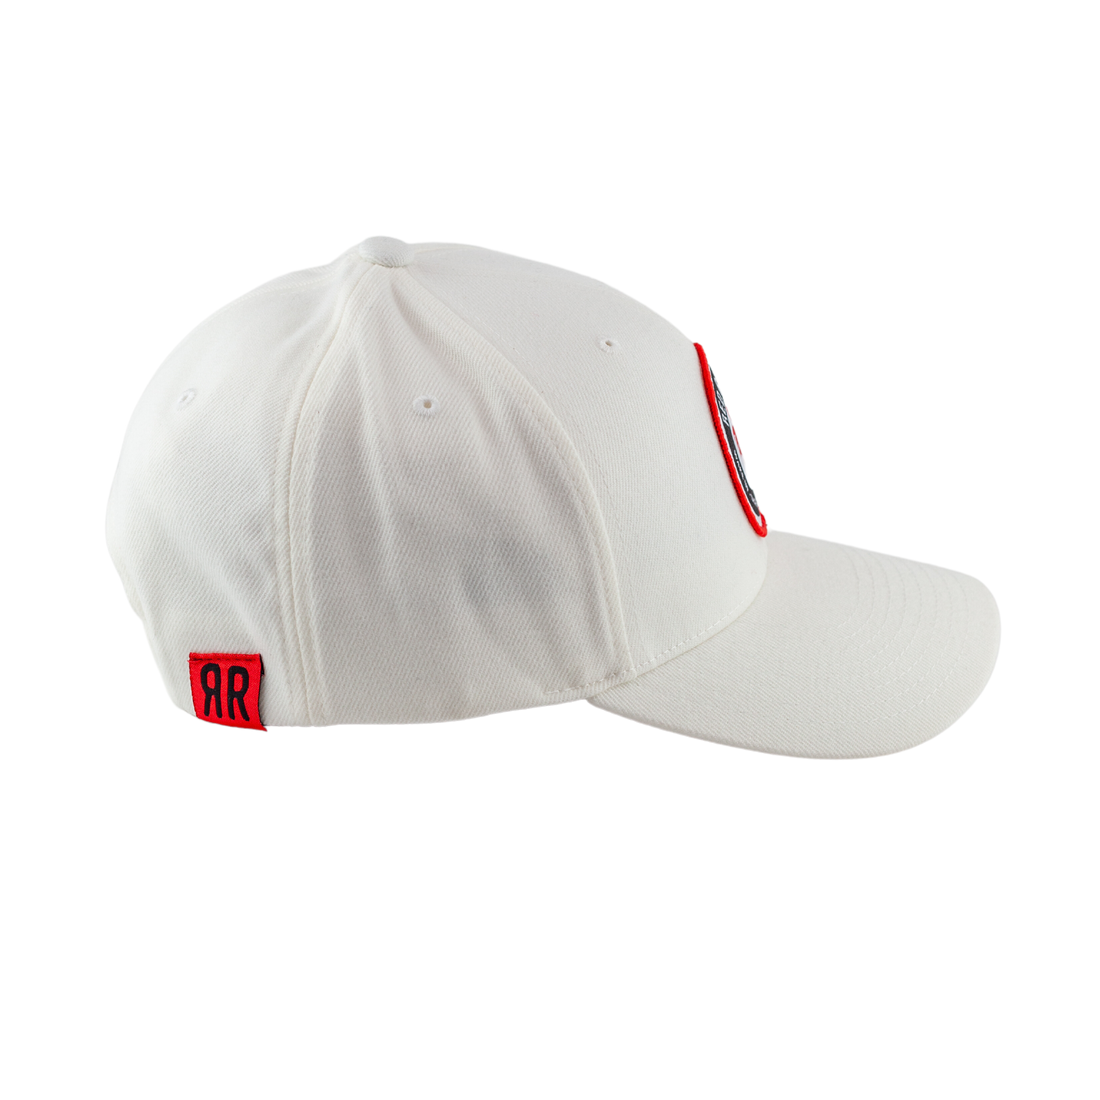 Youth SnapBack - White side view